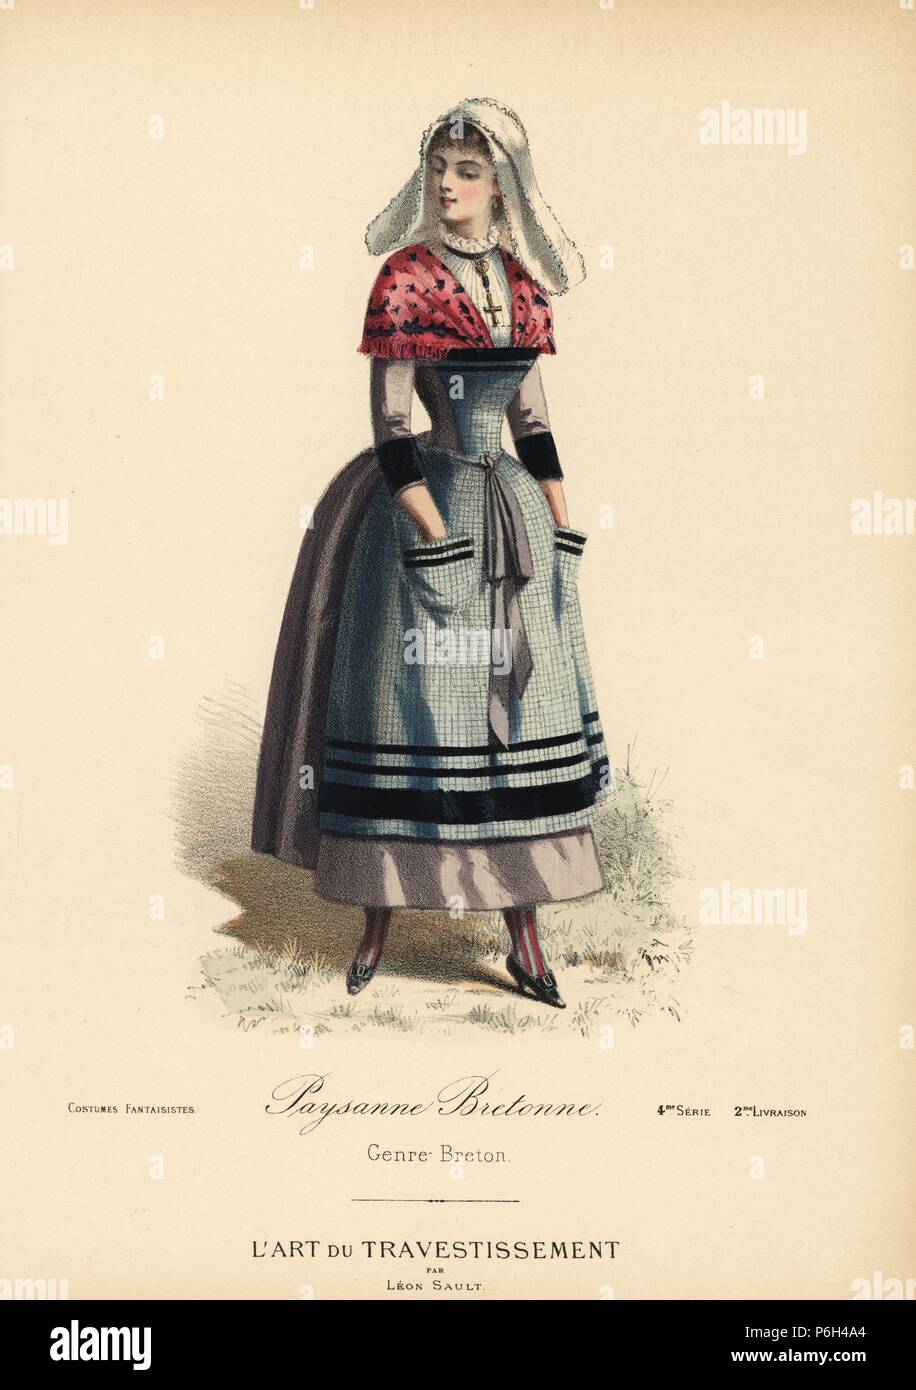 Fancy dress costume for a Brittany peasant girl, with linen bonnet, flowery  shawl, silk apron with velvet trim, lilac dress. Handcoloured lithograph  after a design by Leon Sault from "L'Art du Travestissement" (